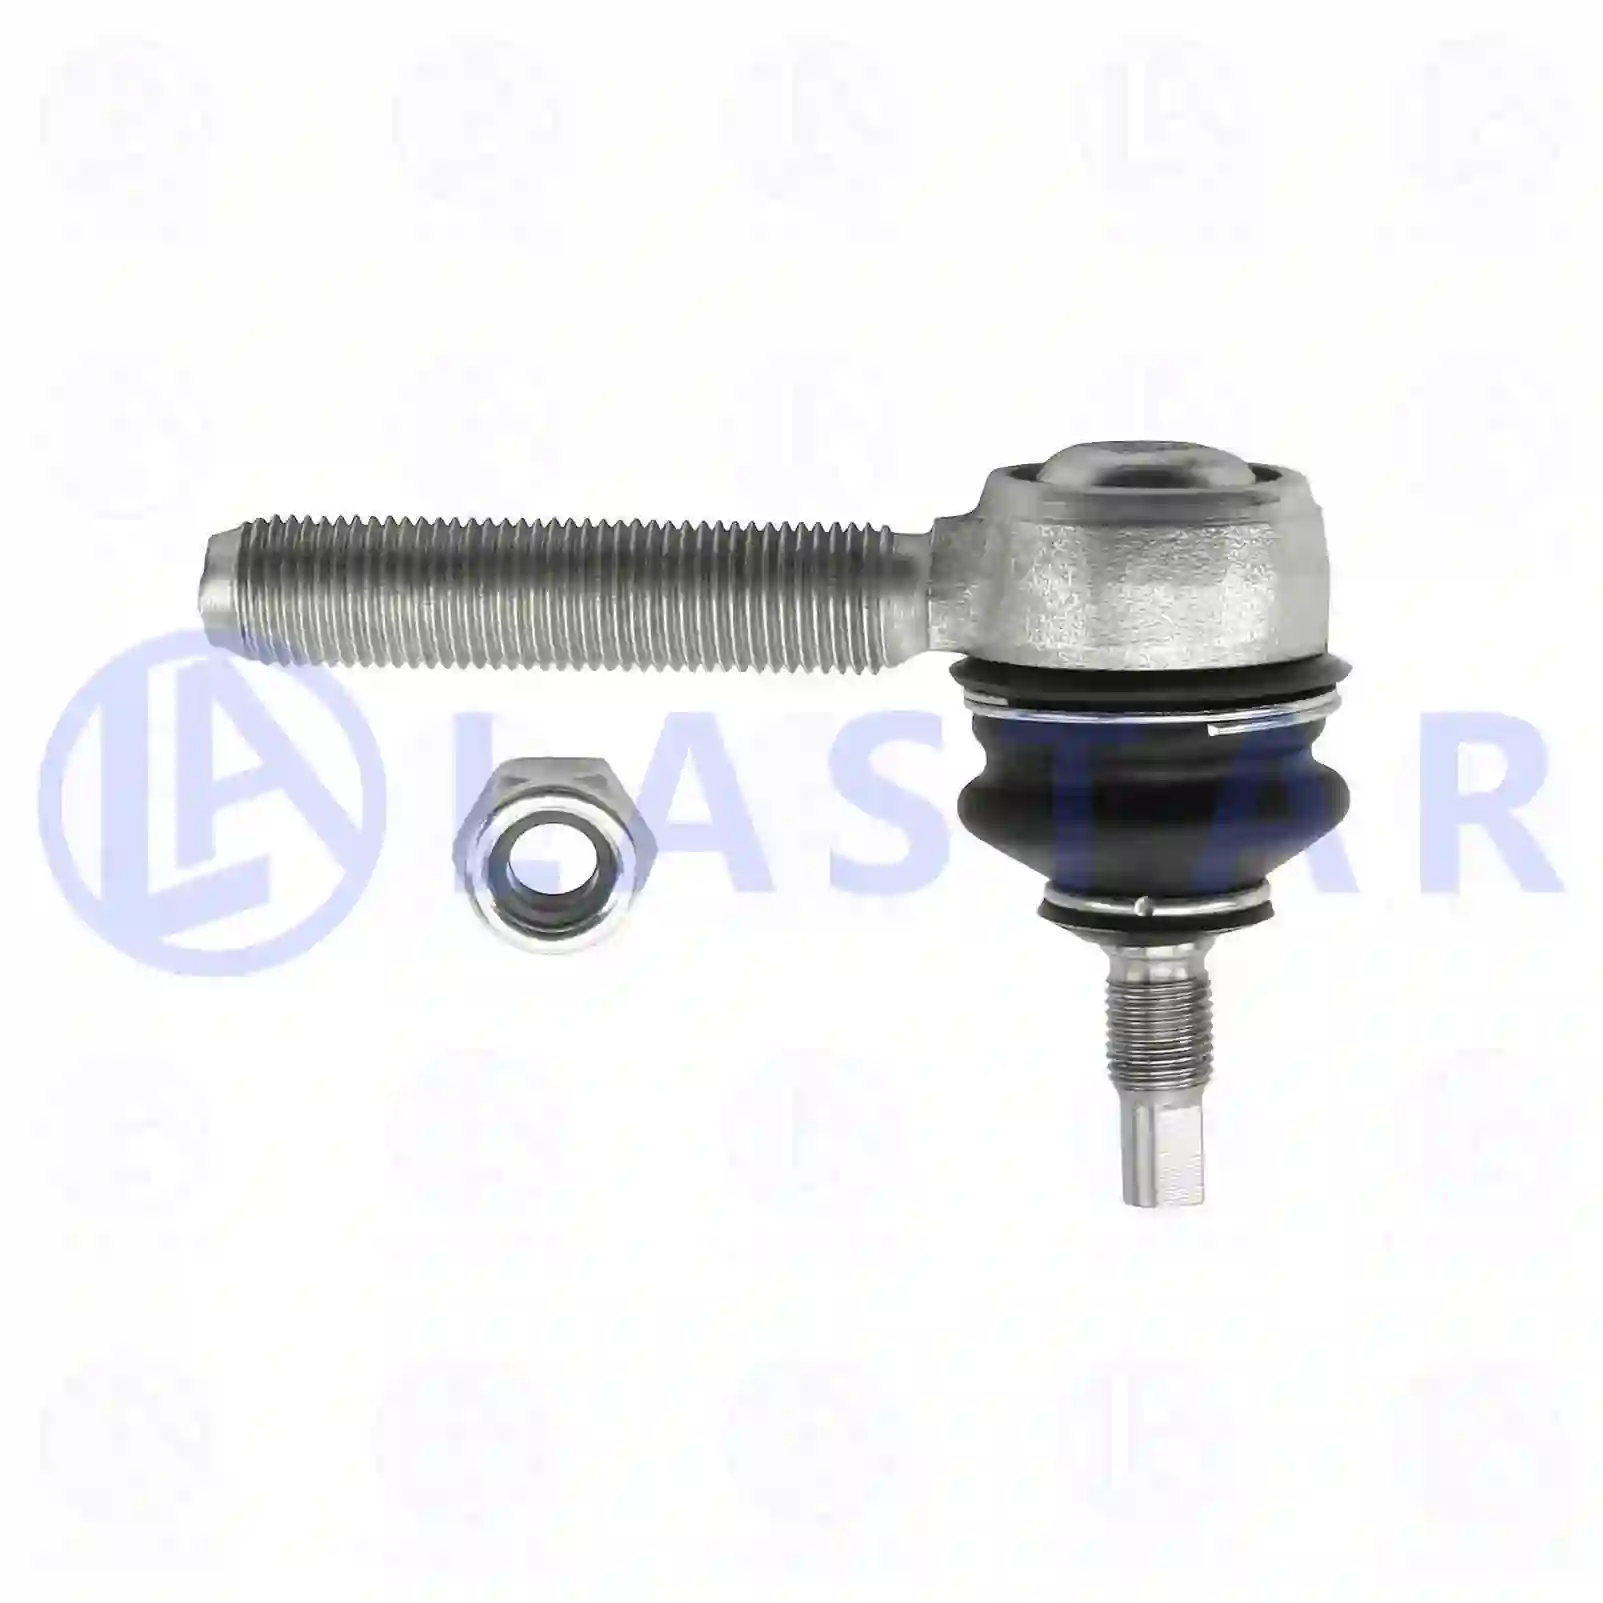 Ball joint, right hand thread, 77731607, 0542477, 1639955, 542477, 91953010045, 0002685289, 1527453 ||  77731607 Lastar Spare Part | Truck Spare Parts, Auotomotive Spare Parts Ball joint, right hand thread, 77731607, 0542477, 1639955, 542477, 91953010045, 0002685289, 1527453 ||  77731607 Lastar Spare Part | Truck Spare Parts, Auotomotive Spare Parts